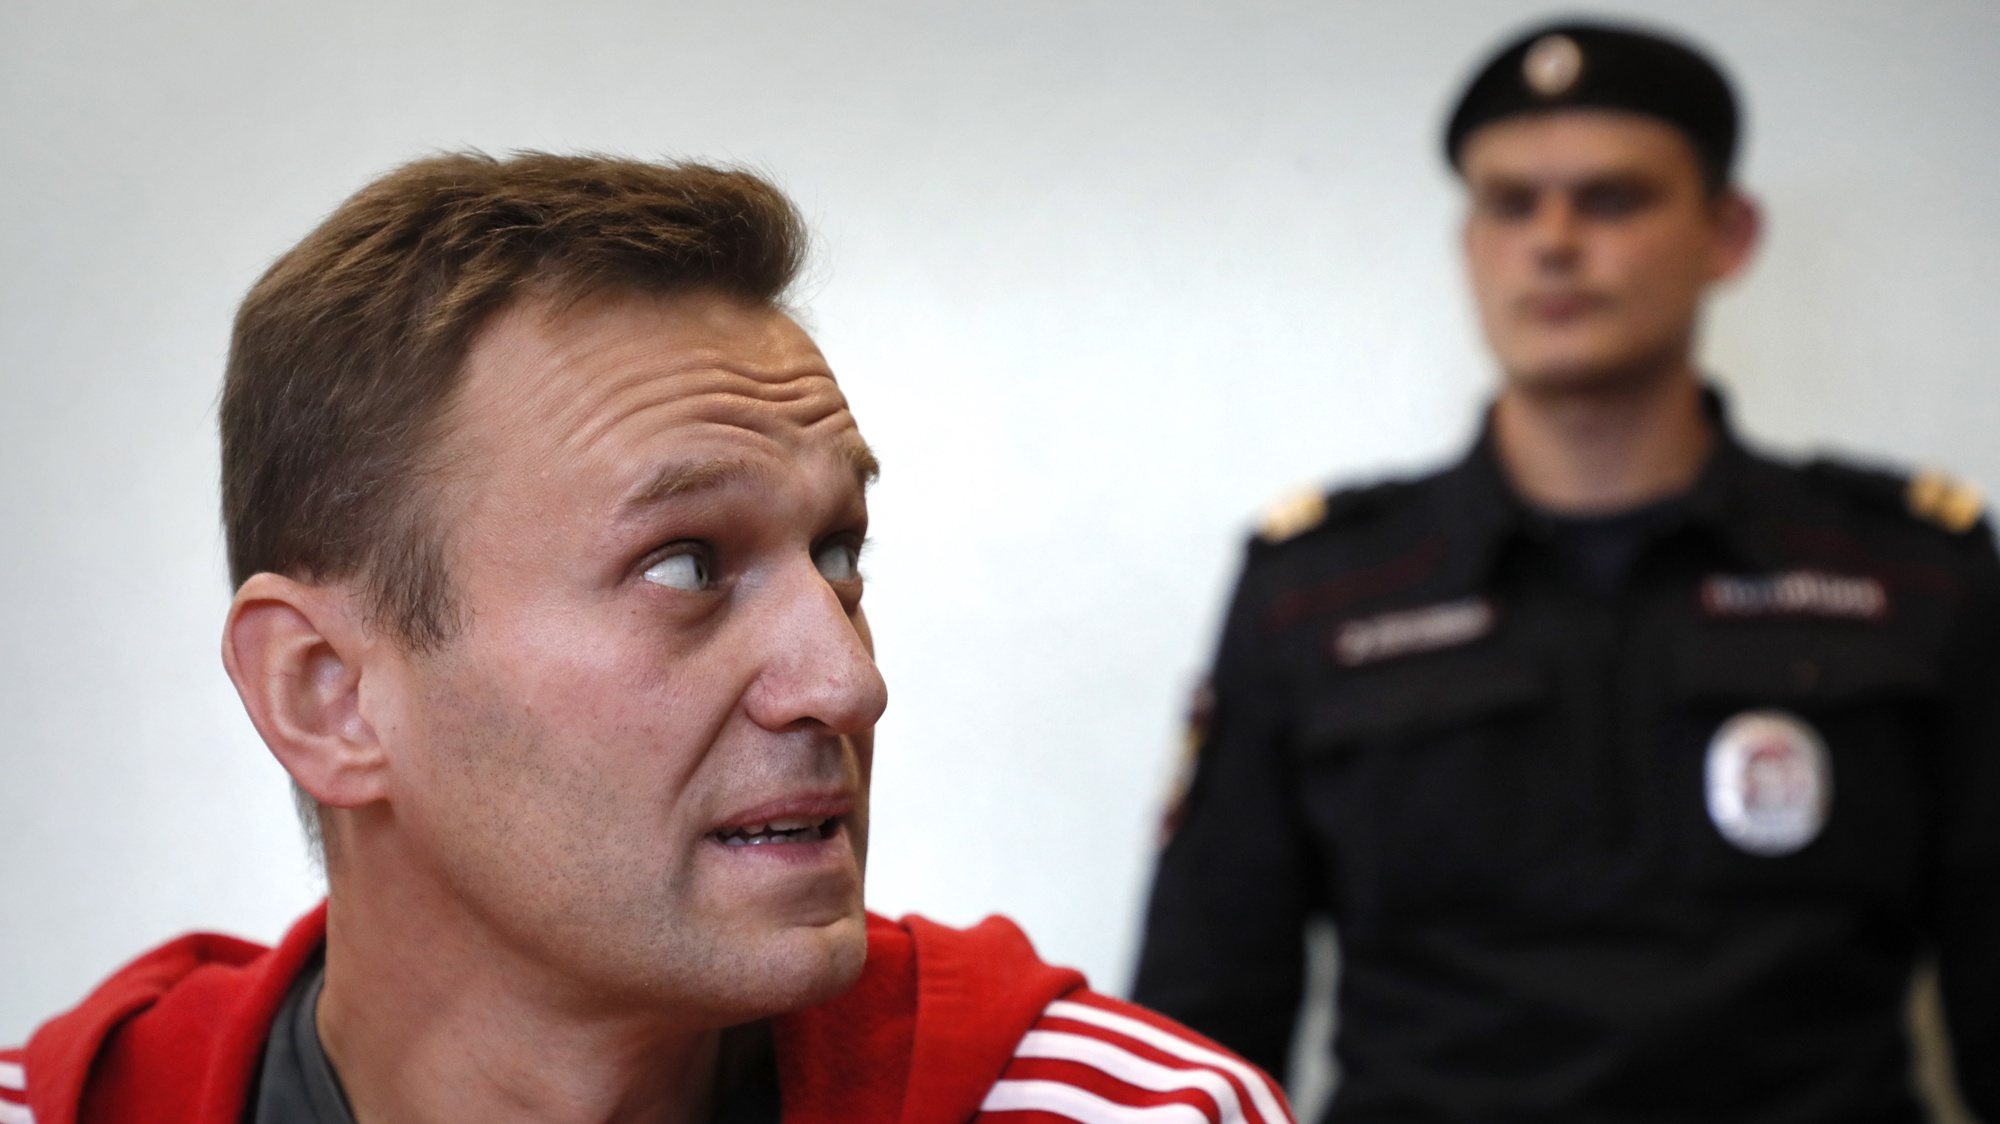 epa08908891 (FILE) - Russian opposition leader Alexei Navalny (L) attends a hearing at the Simonovsky District court in Moscow, Russia, 22 August 2019 (reissued 29 December 2020). According to Navalny&#039;s lawyer, Russian officials threaten to jail Alexey Navalny for failing to comply with terms of a suspended sentence if he doesn&#039;t show up for a hearing in Moscow, Russia on 30 December 2020.  EPA/YURI KOCHETKOV *** Local Caption *** 55729299